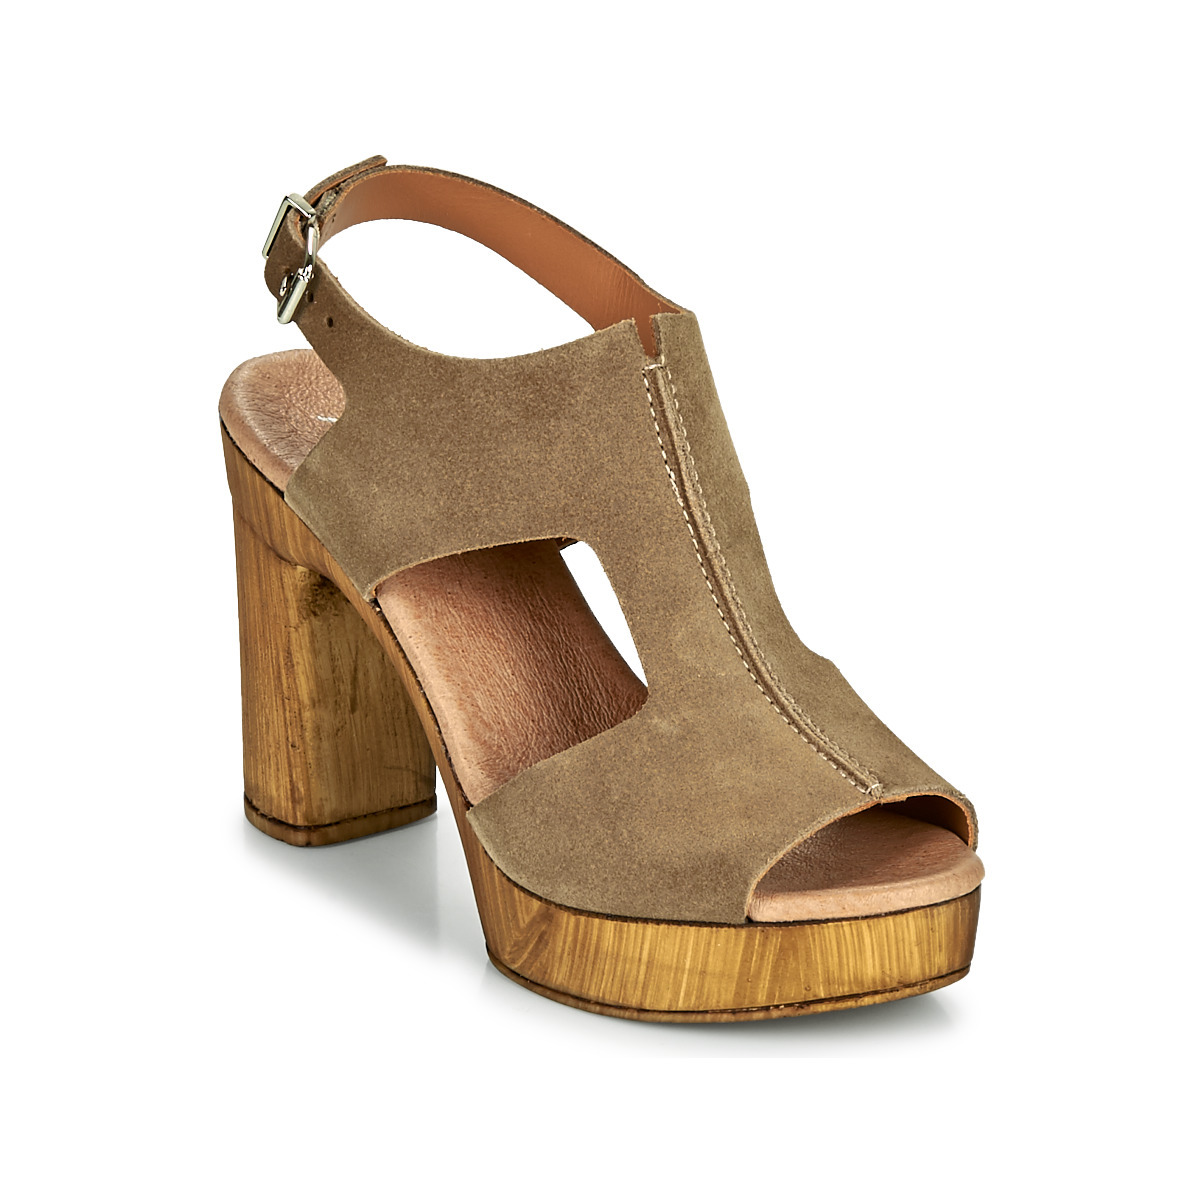 Spartoo - Woman Sandals in Brown by Myma GOOFASH